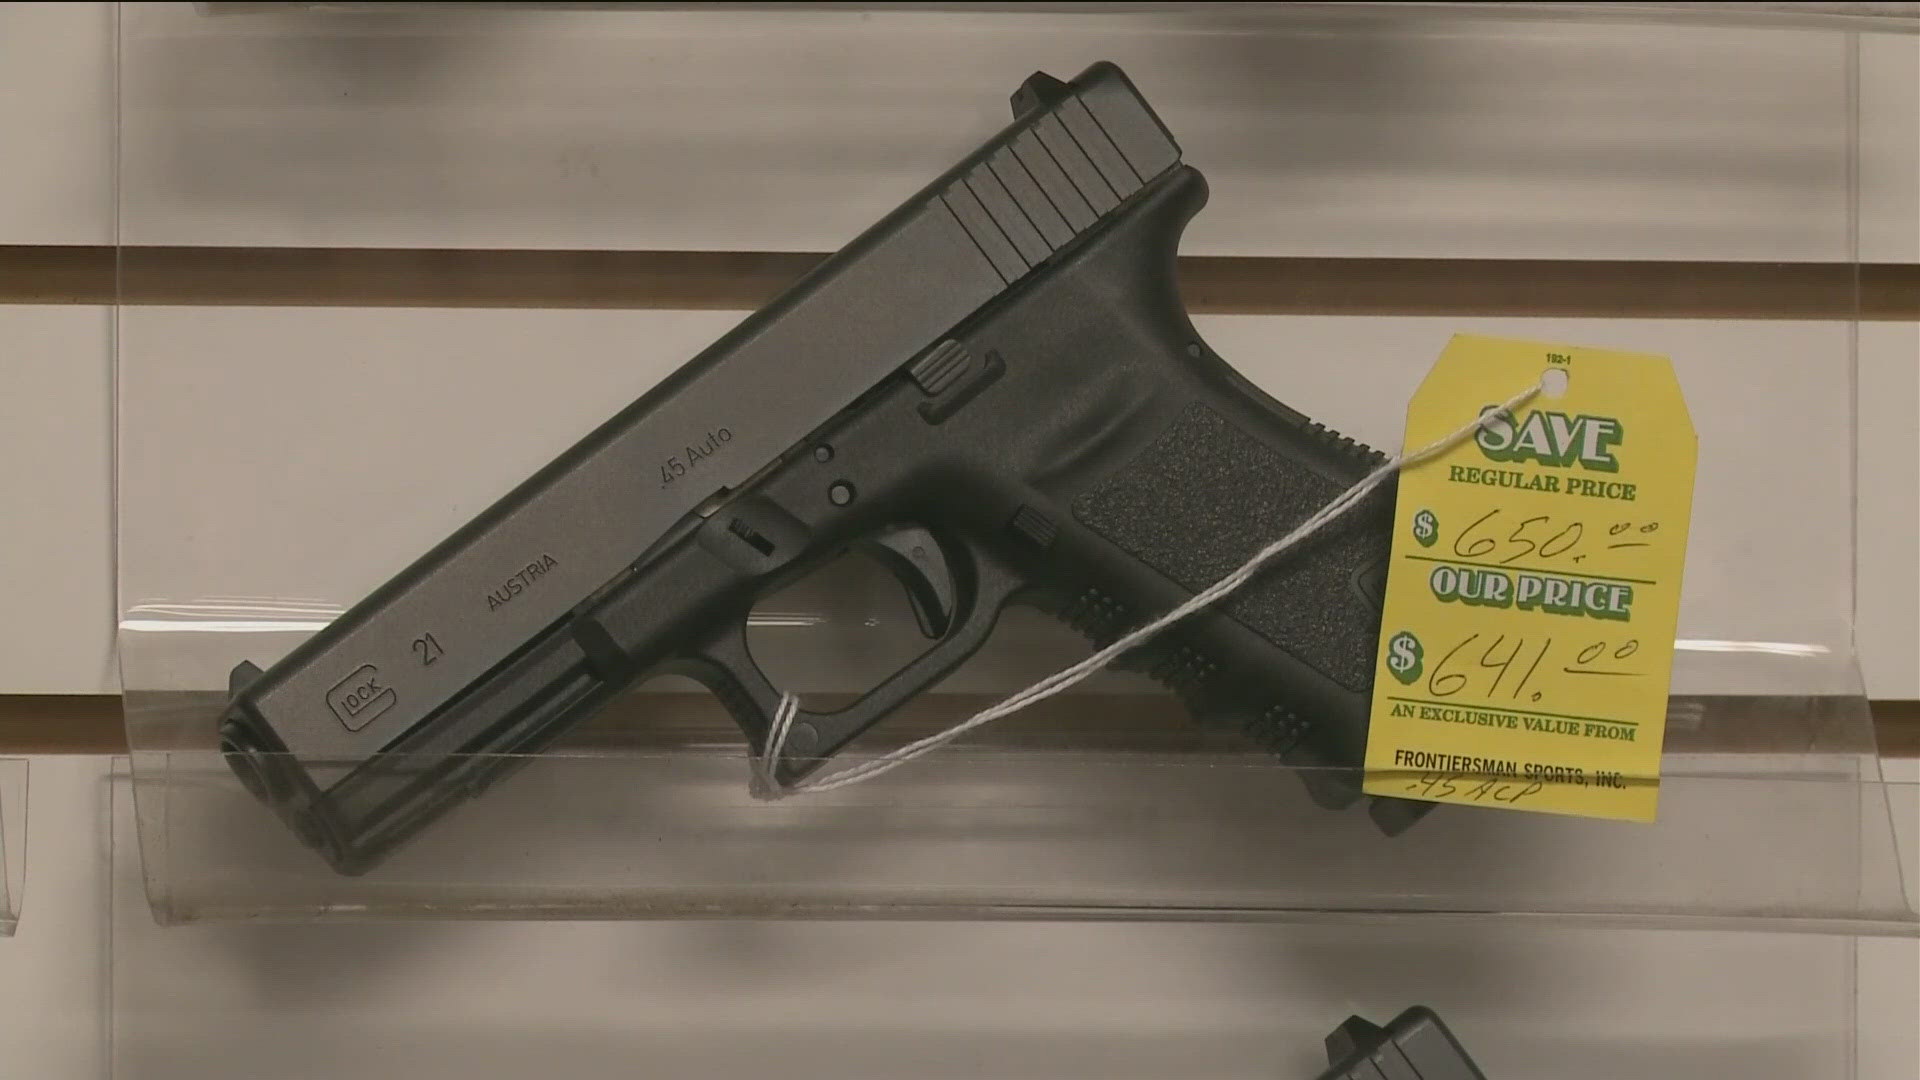 A set of gun bills are one step closer to becoming state law.